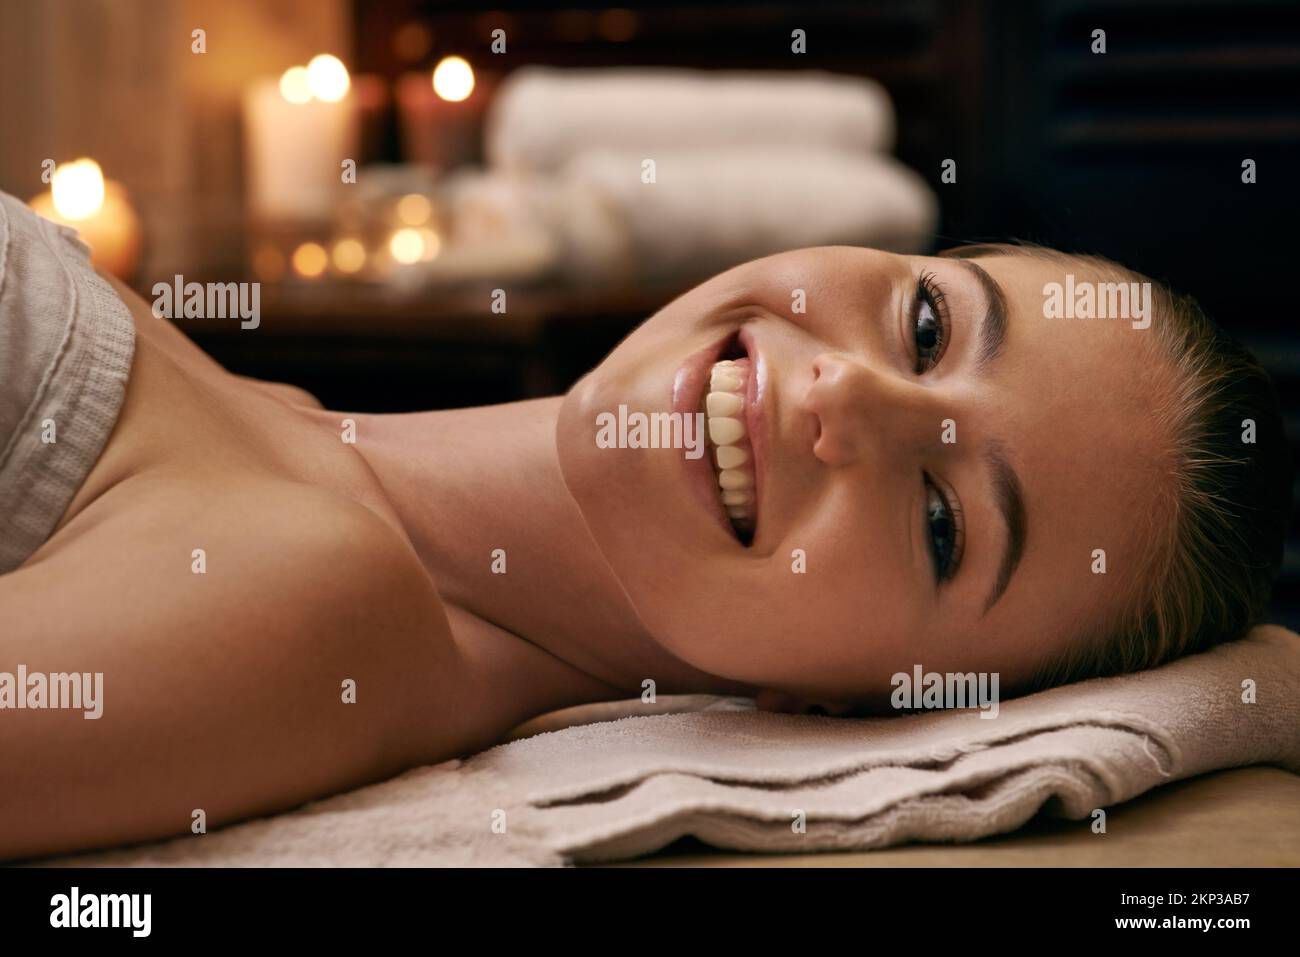 Pure enjoyment and relaxation. Closeup shot of a young woman relaxing during a spa treatment. Stock Photo